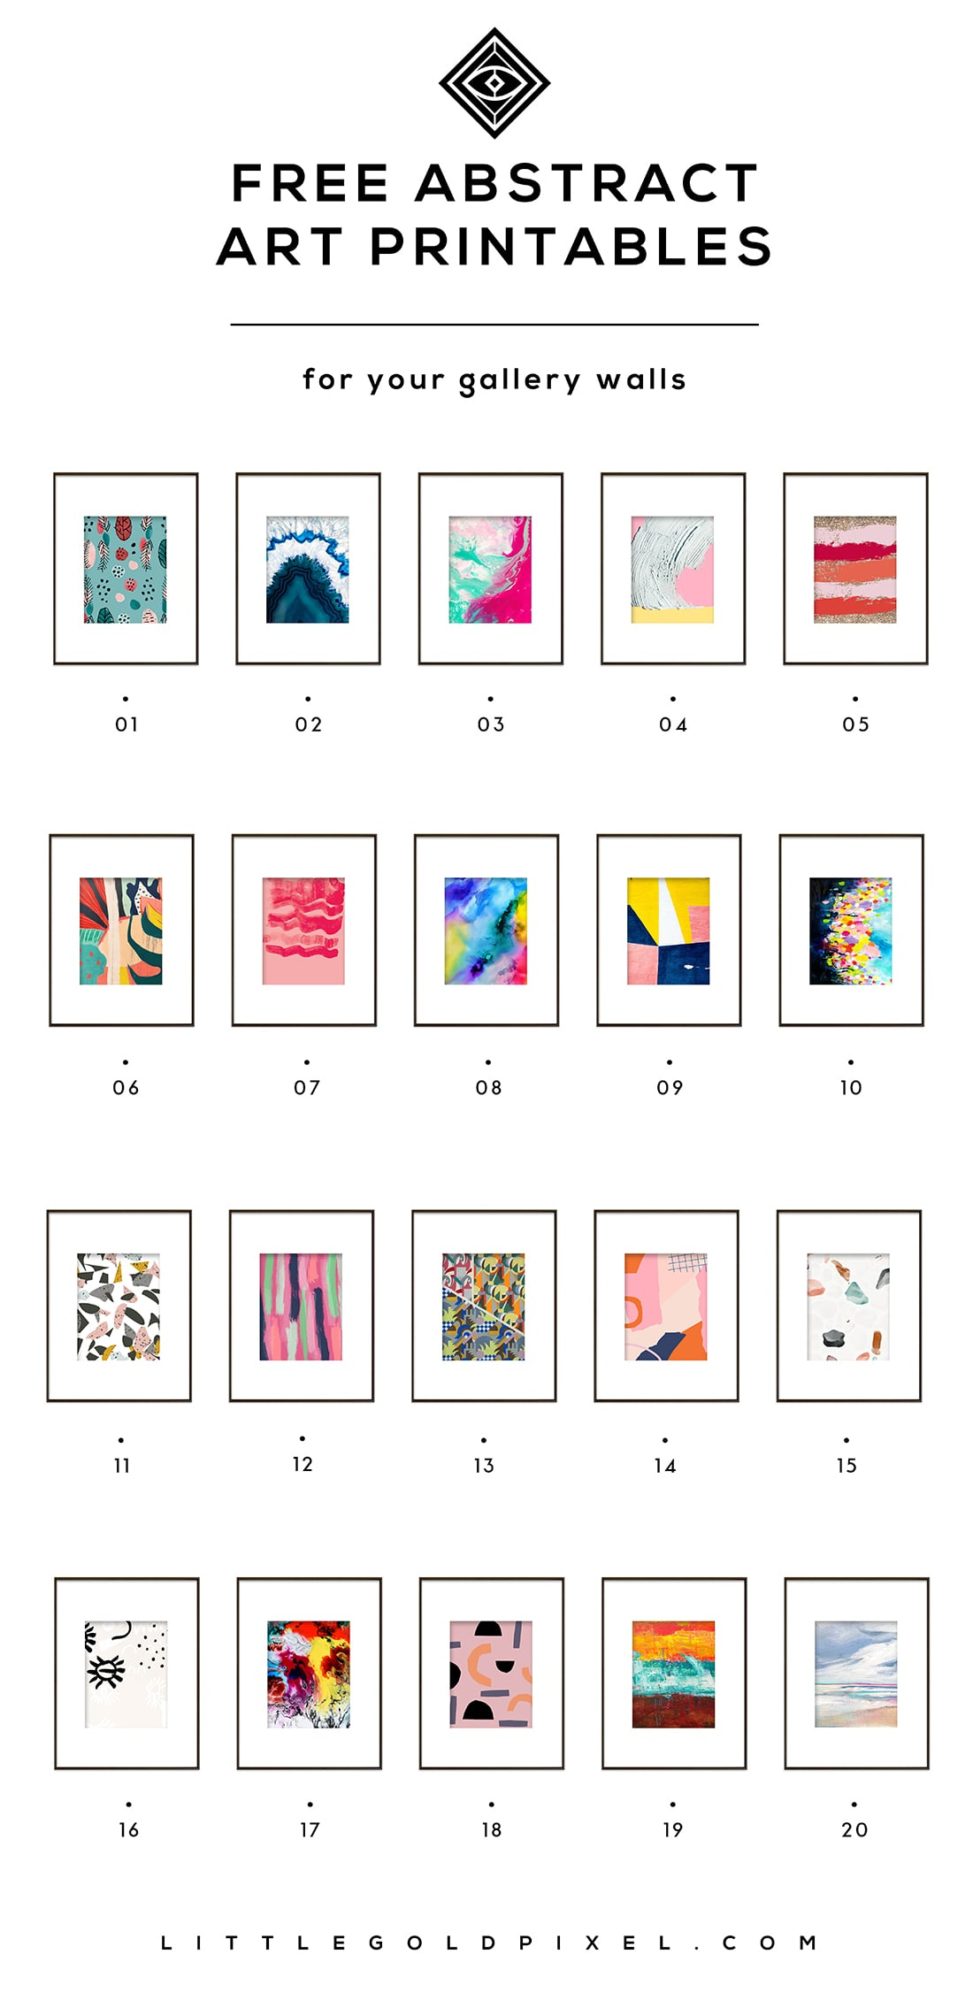 20 Free Abstract Art Printables For Your Gallery Walls Little Gold Pixel